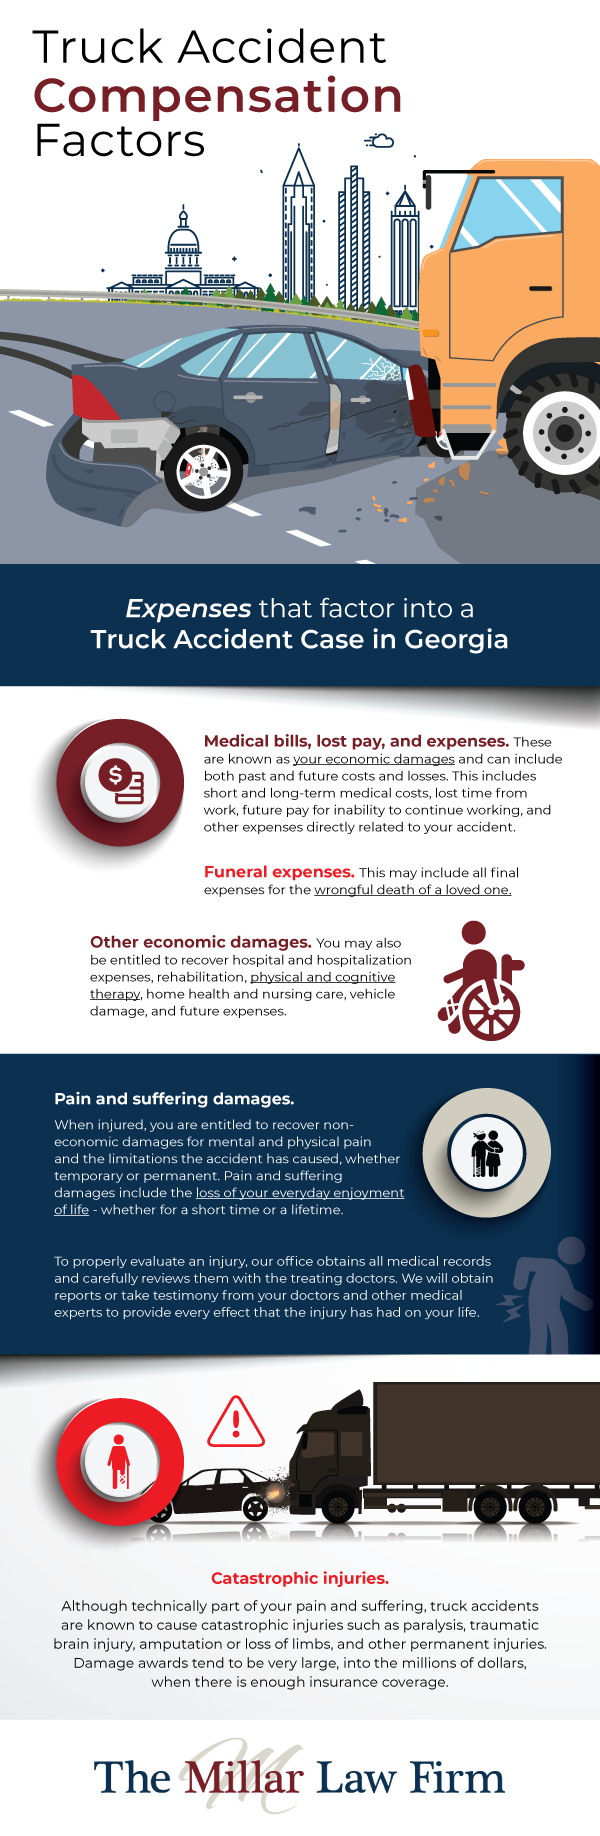 Infographic: truck accident compensation factors, the expenses that factor into a truck accident case in Georgia